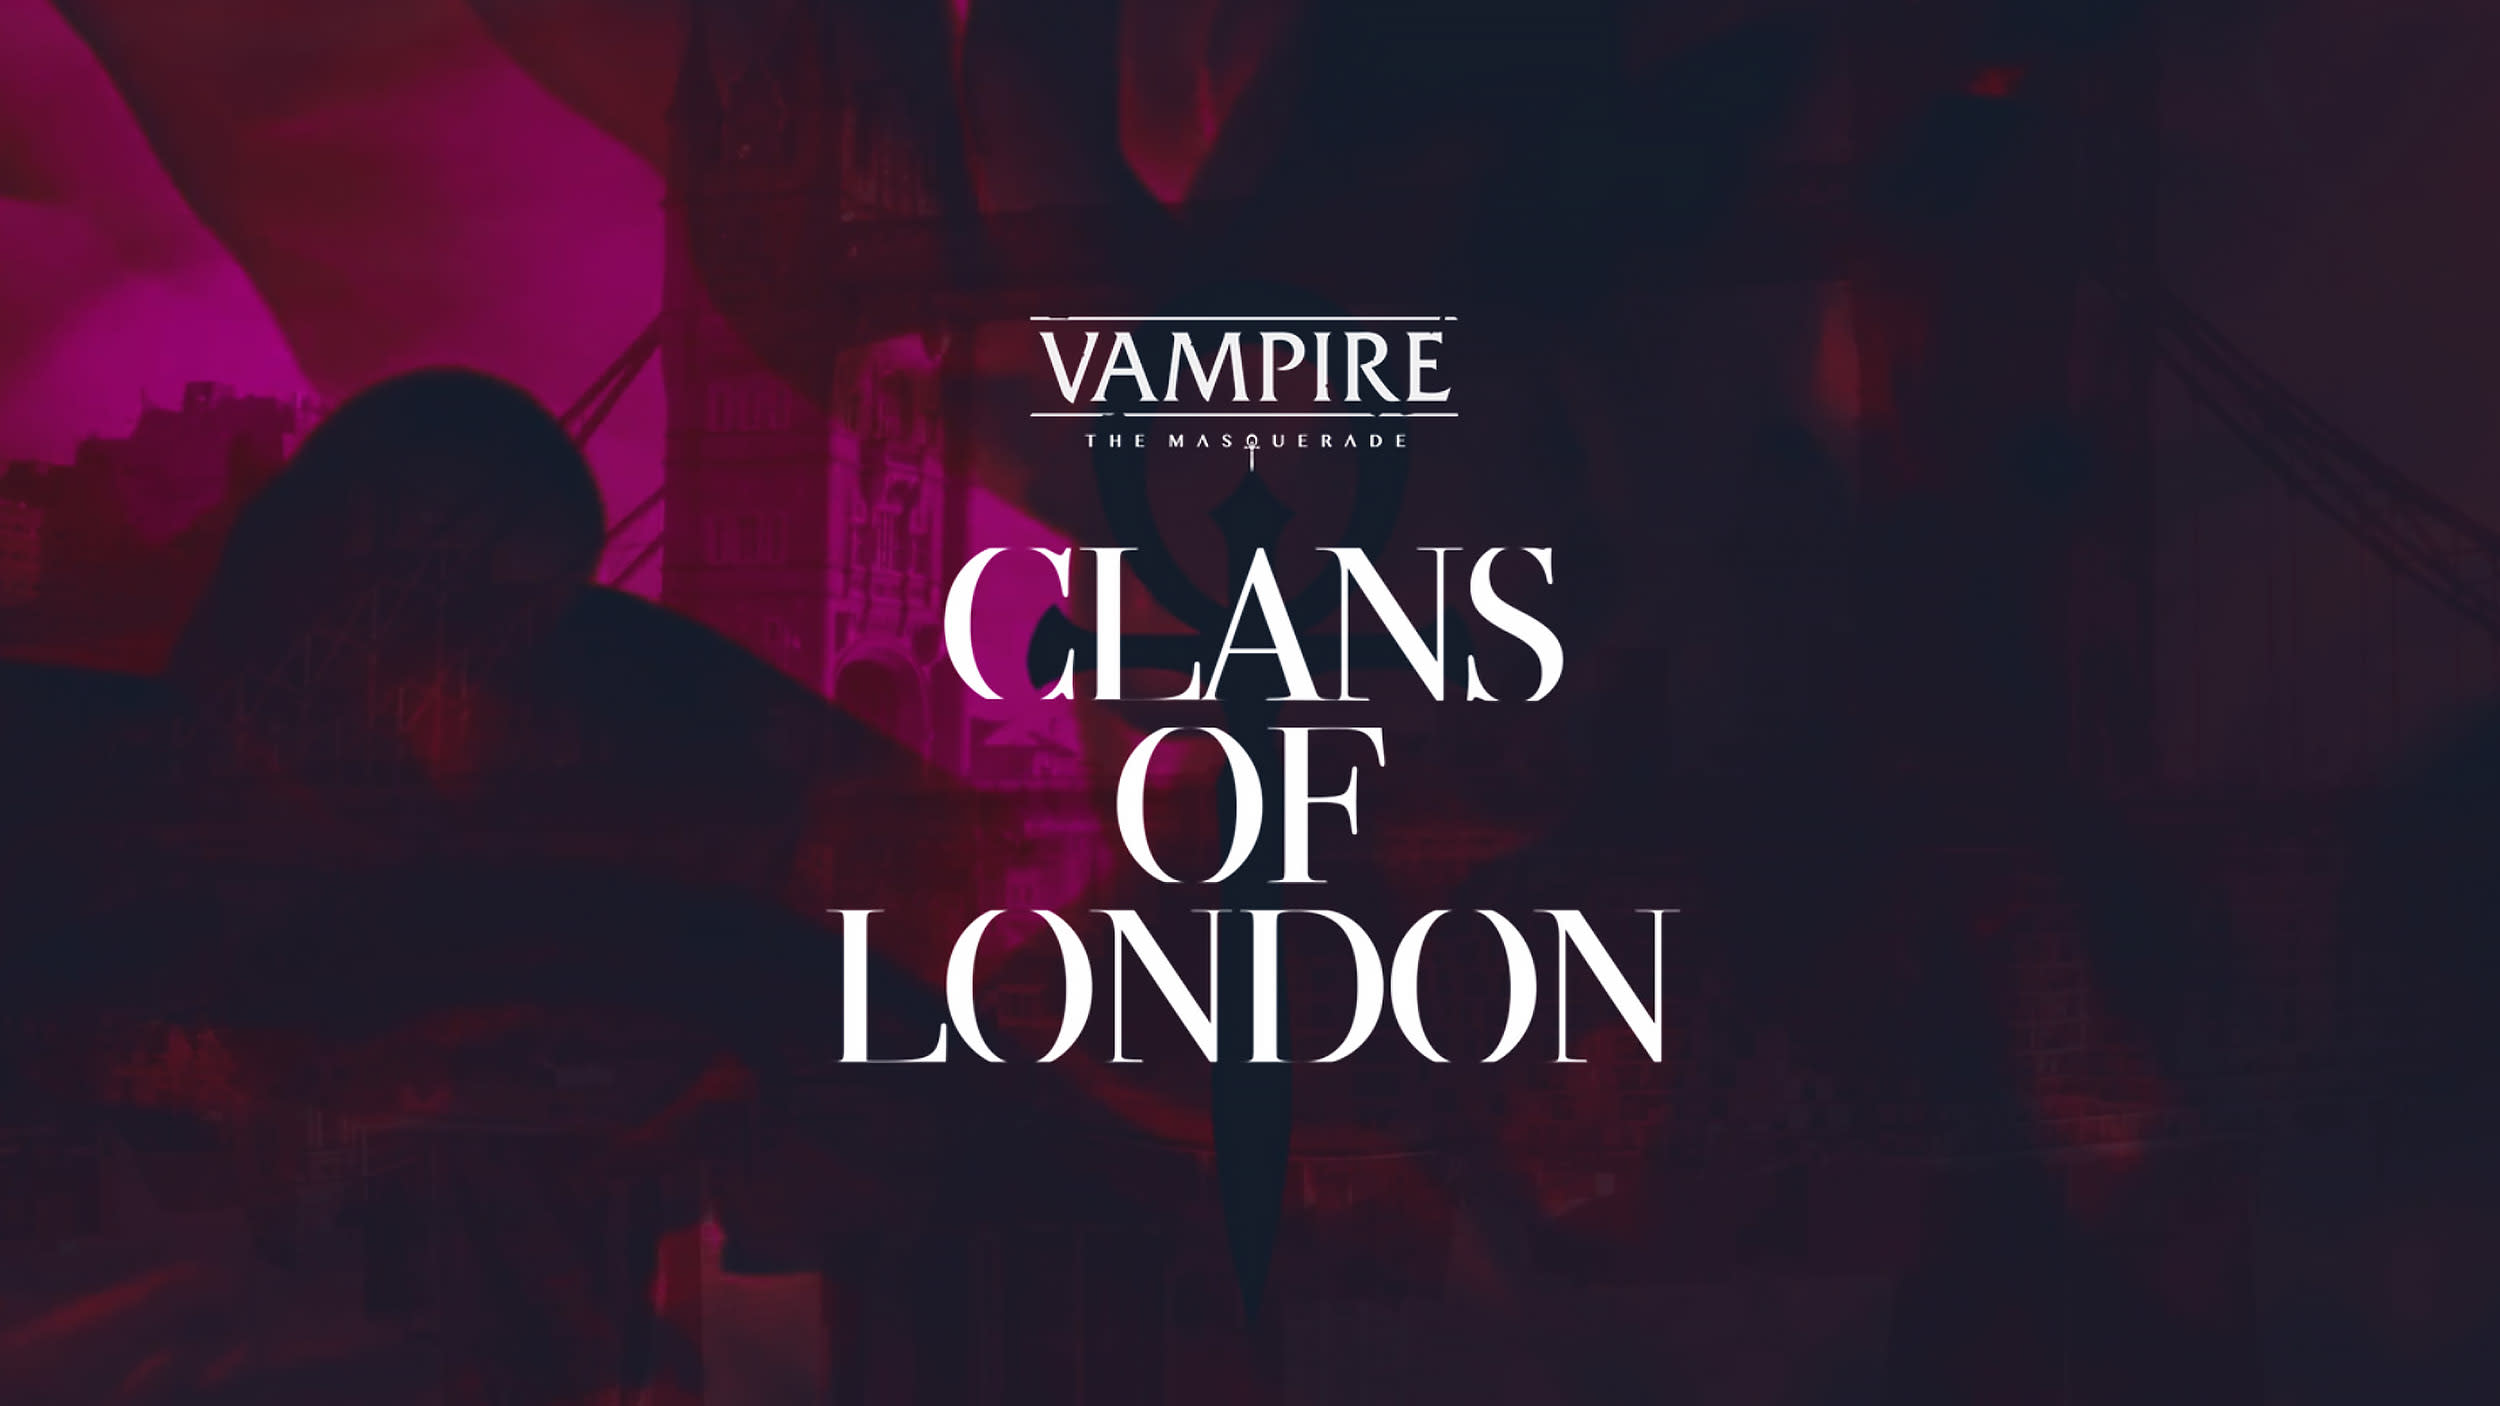 World of Darkness - Vampire: The Masquerade - Clans of London